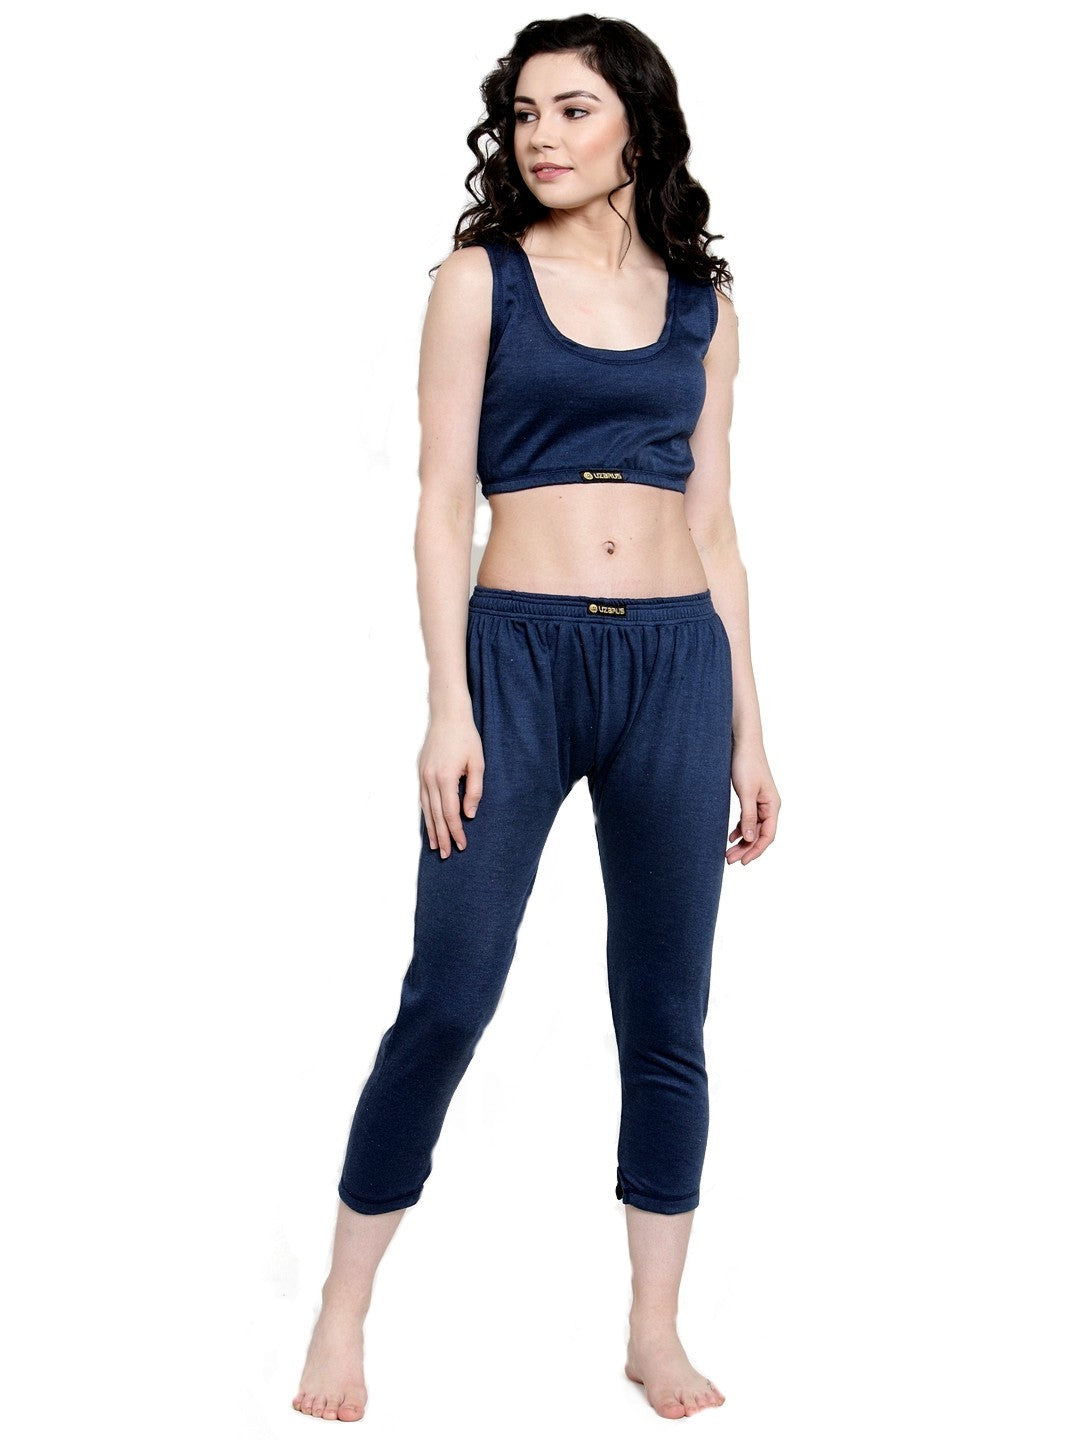 WOMEN'S SOLID INNER THERMAL WEAR TOP AND BOTTOM SET